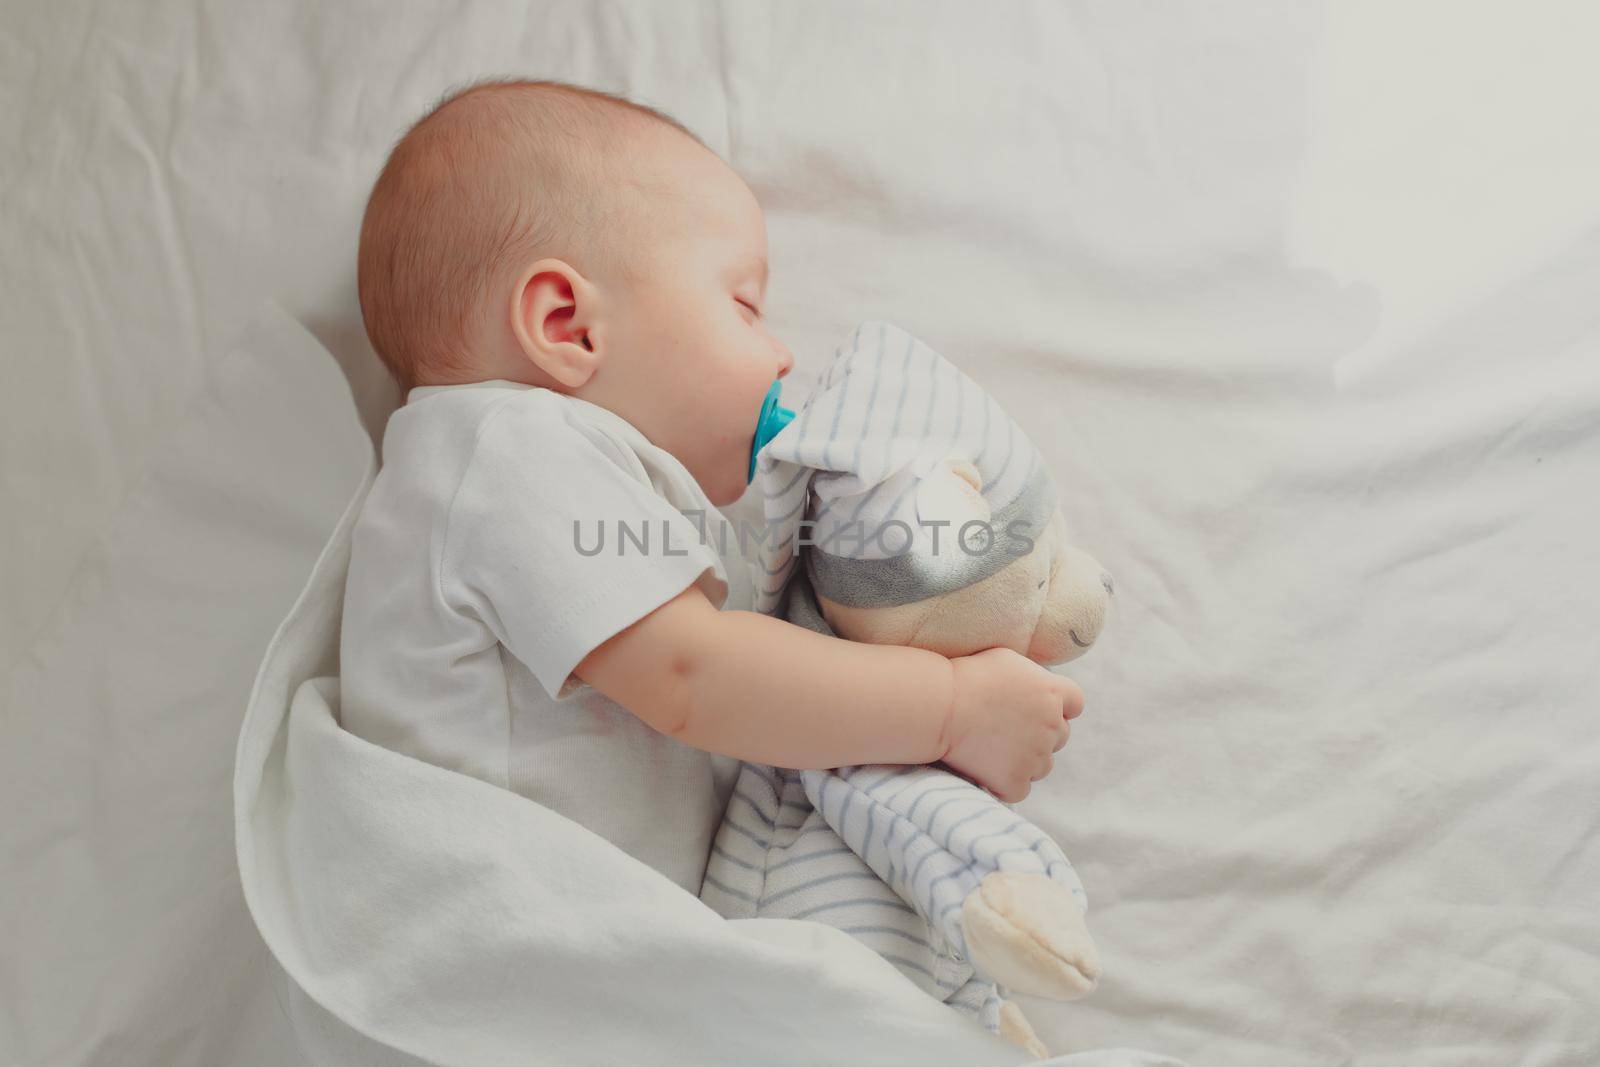 The baby is sleeping in his crib. Happy baby dream. A happy child. Children's article. Copy Space